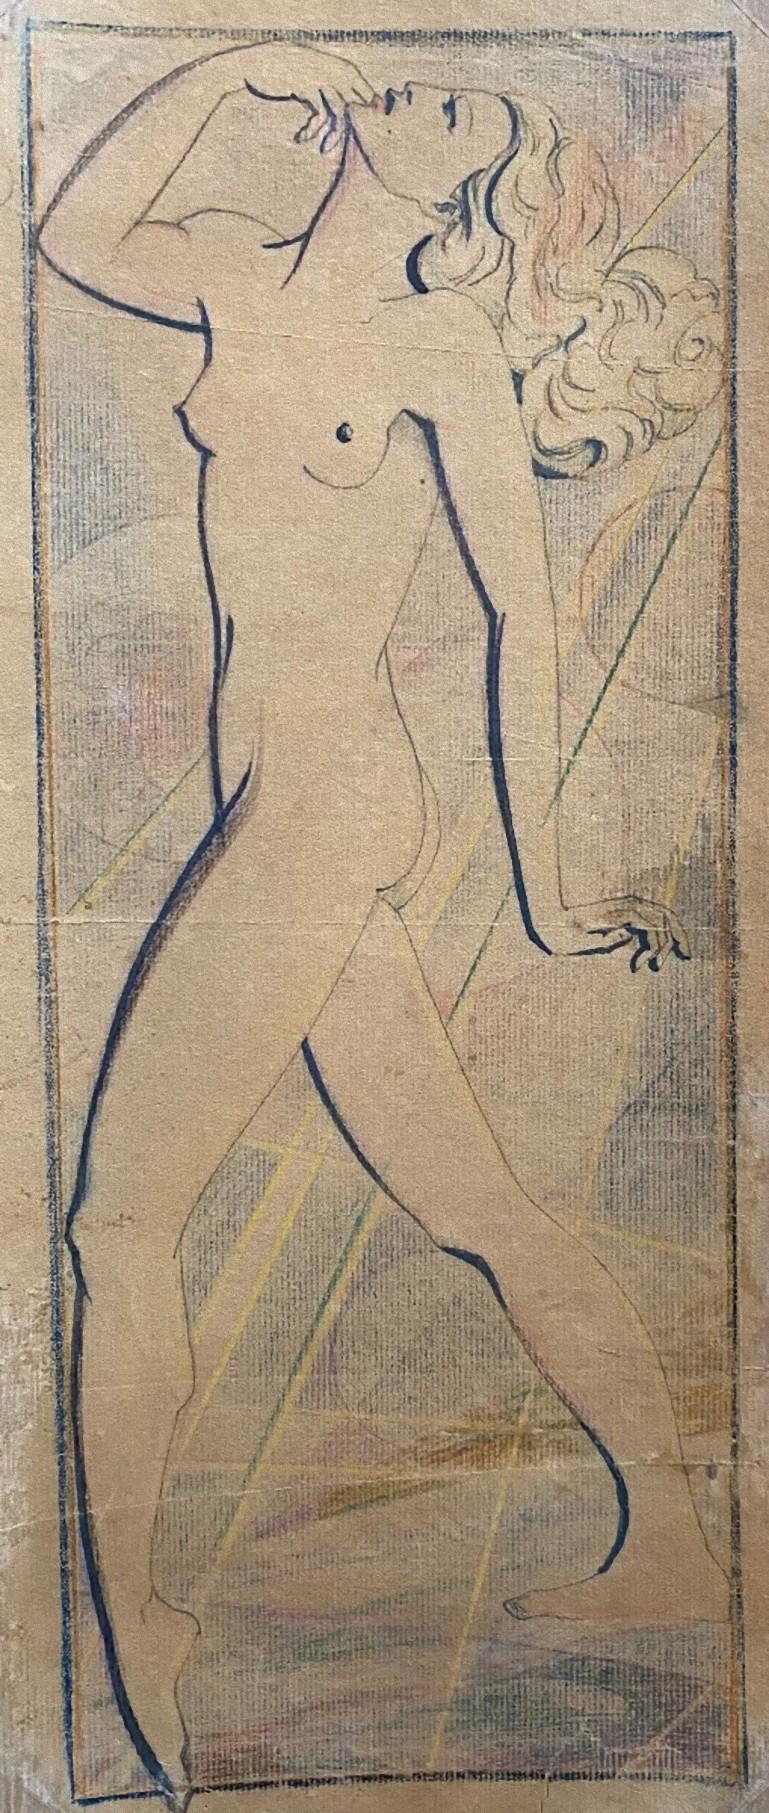 Nude of Woman - Vintage Pencil and Pastels Drawing - Early 20th Century